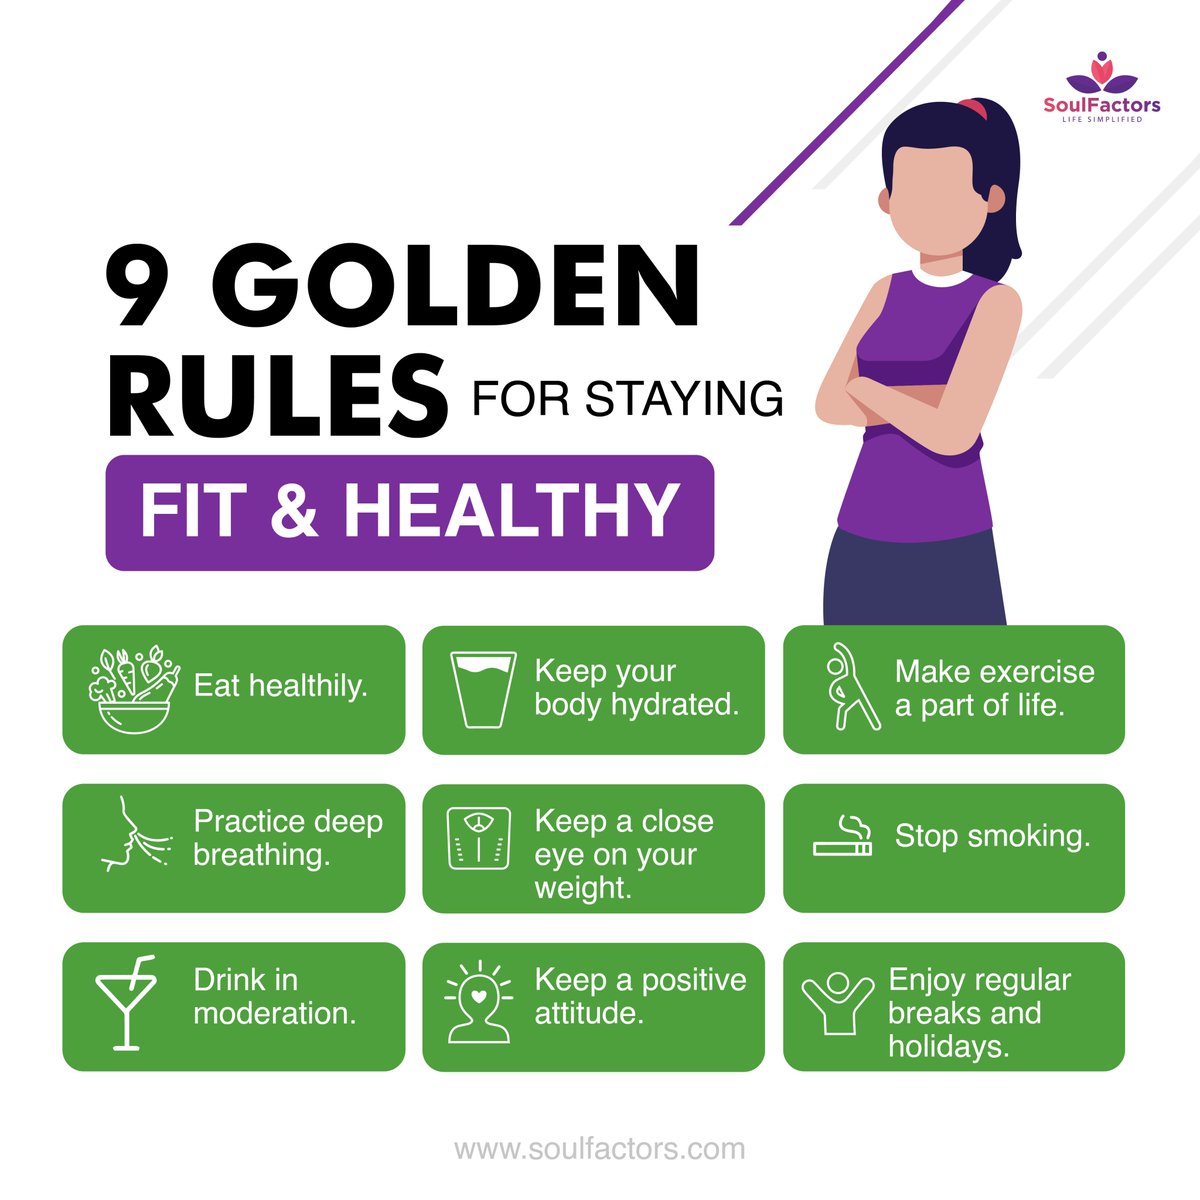 9 Golden Rules For Staying Fit And Healthy!
.
.
#soulfactors #soulfactorslifesimplified #thecompletewomenblog #stayhealthy #stayfit #stayhealthyandfit #rulestostayfitandhealthy #rulestostayfit #stayfitdontquit #stayhealthytogether #stayhealthyprotectyourself #goldenrules